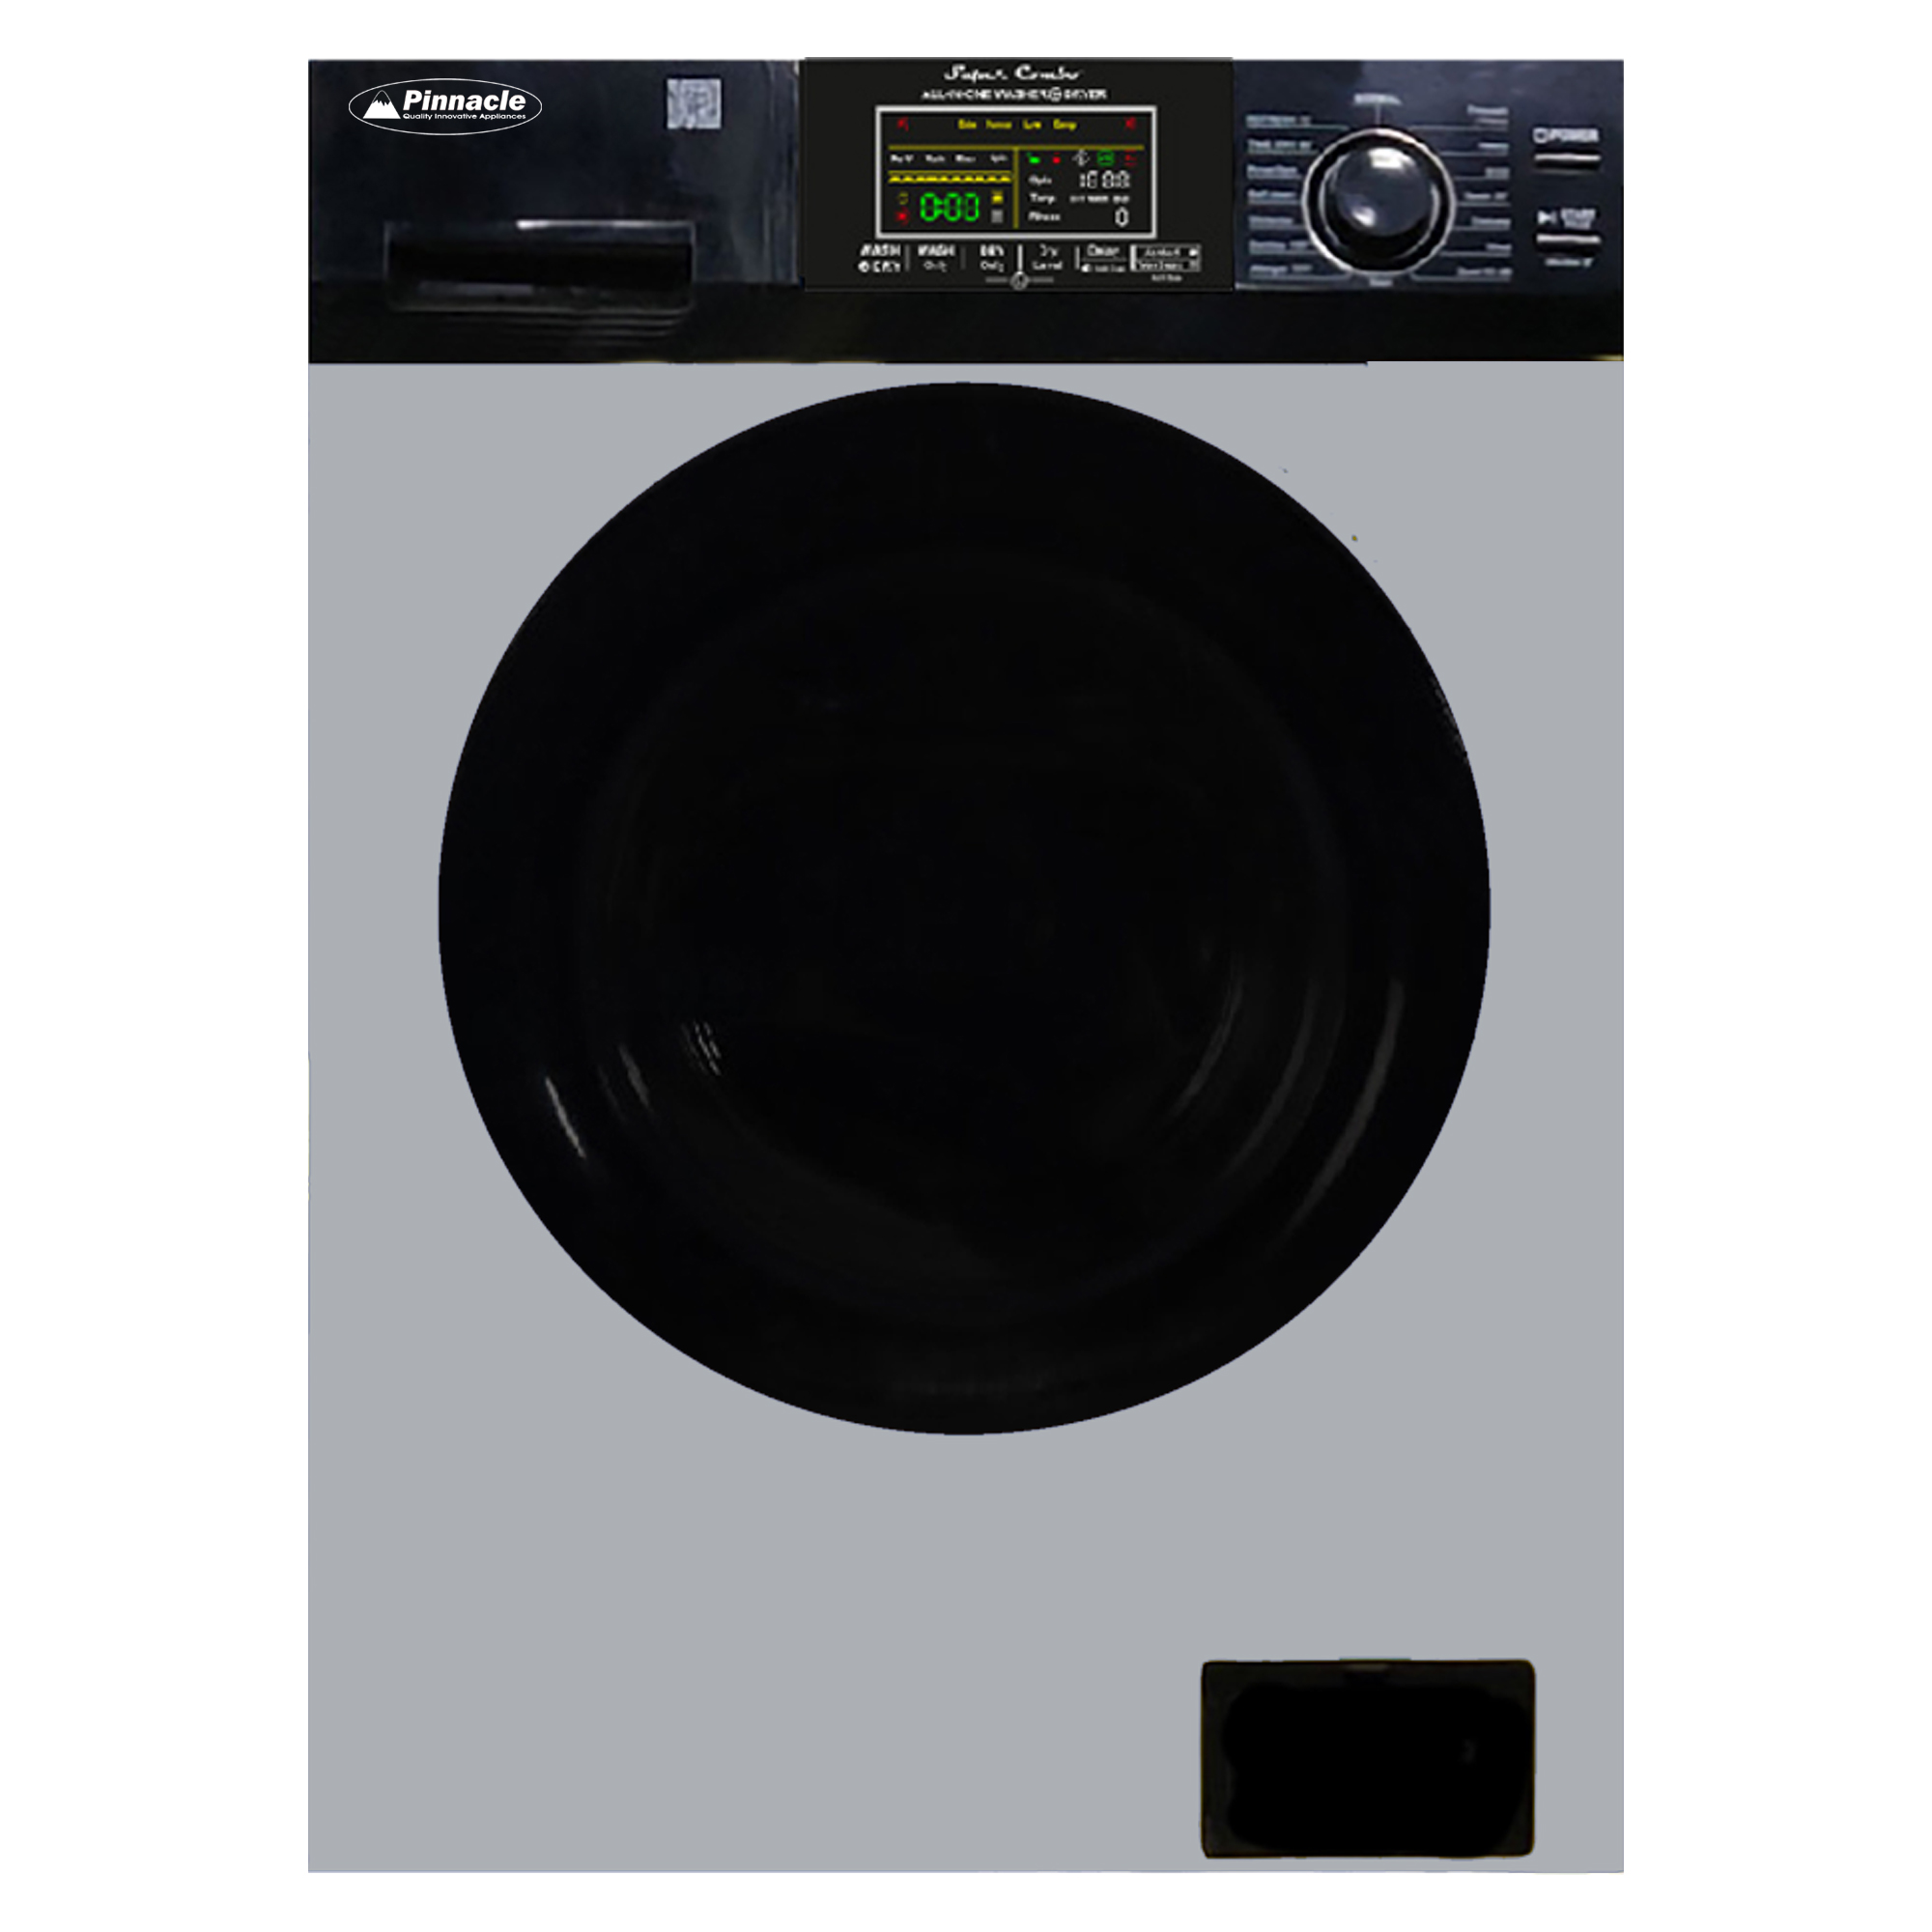 Pinnacle Super Combo Washer-Dryer Silver 21-5500 CV